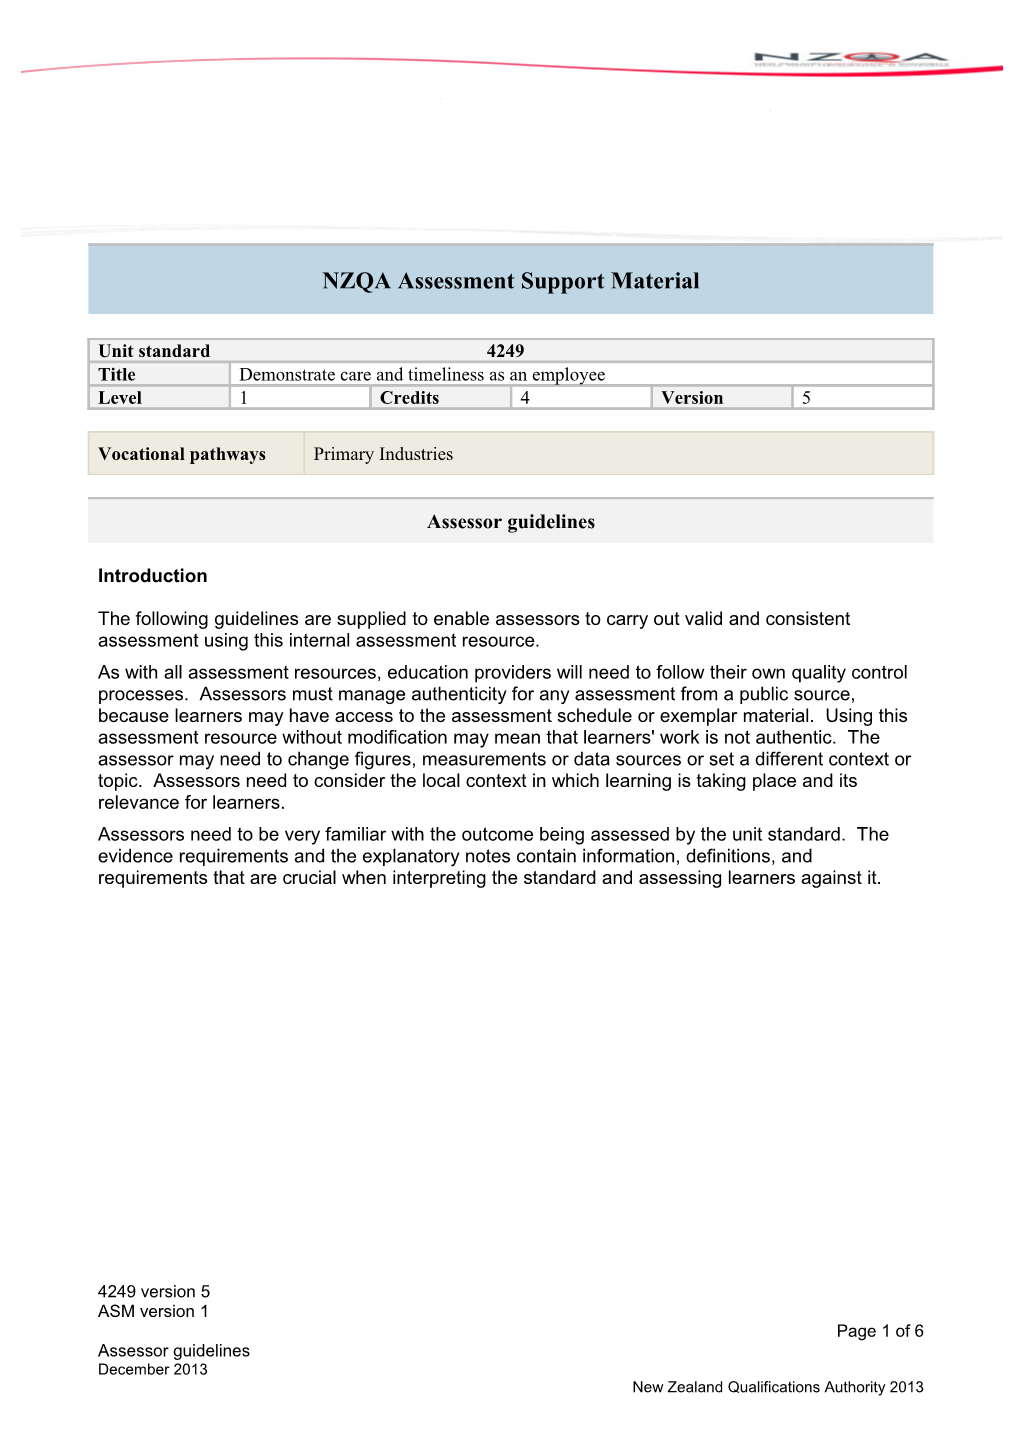 NZQA Assessment Support Material Unit Standard 4249 Title / Demonstrate Care and Timeliness